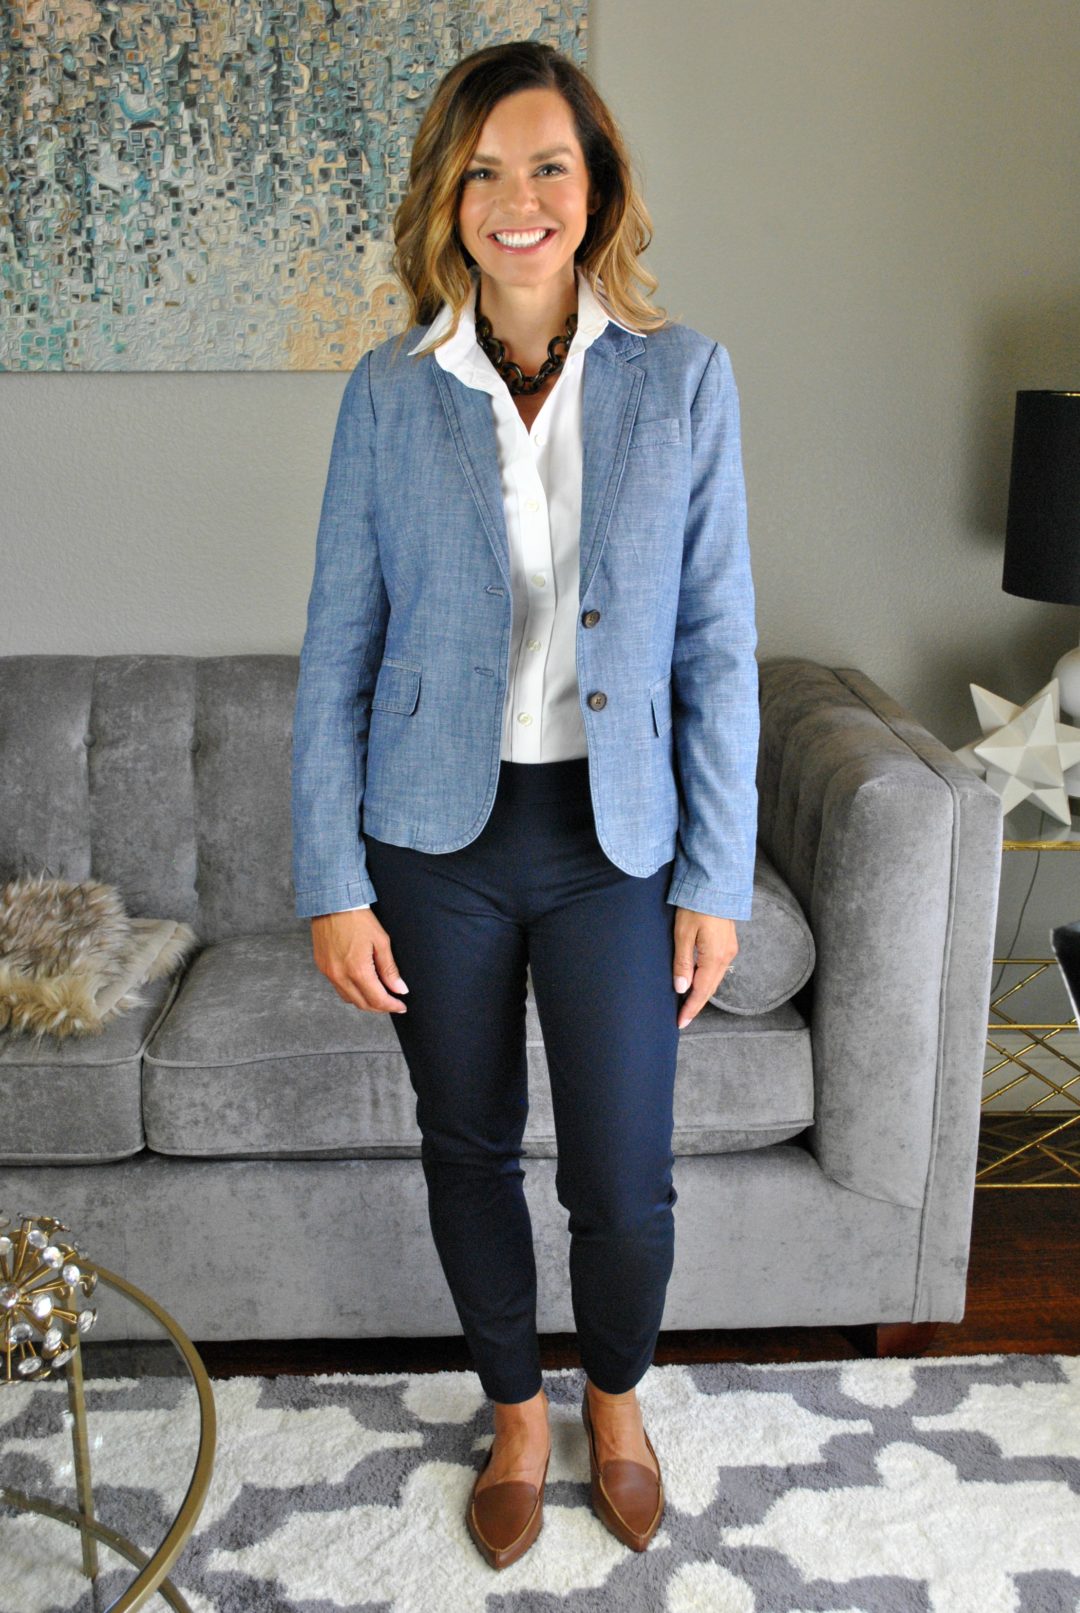 7 Practical And Professional Back-To-School Outfit Ideas For Teachers